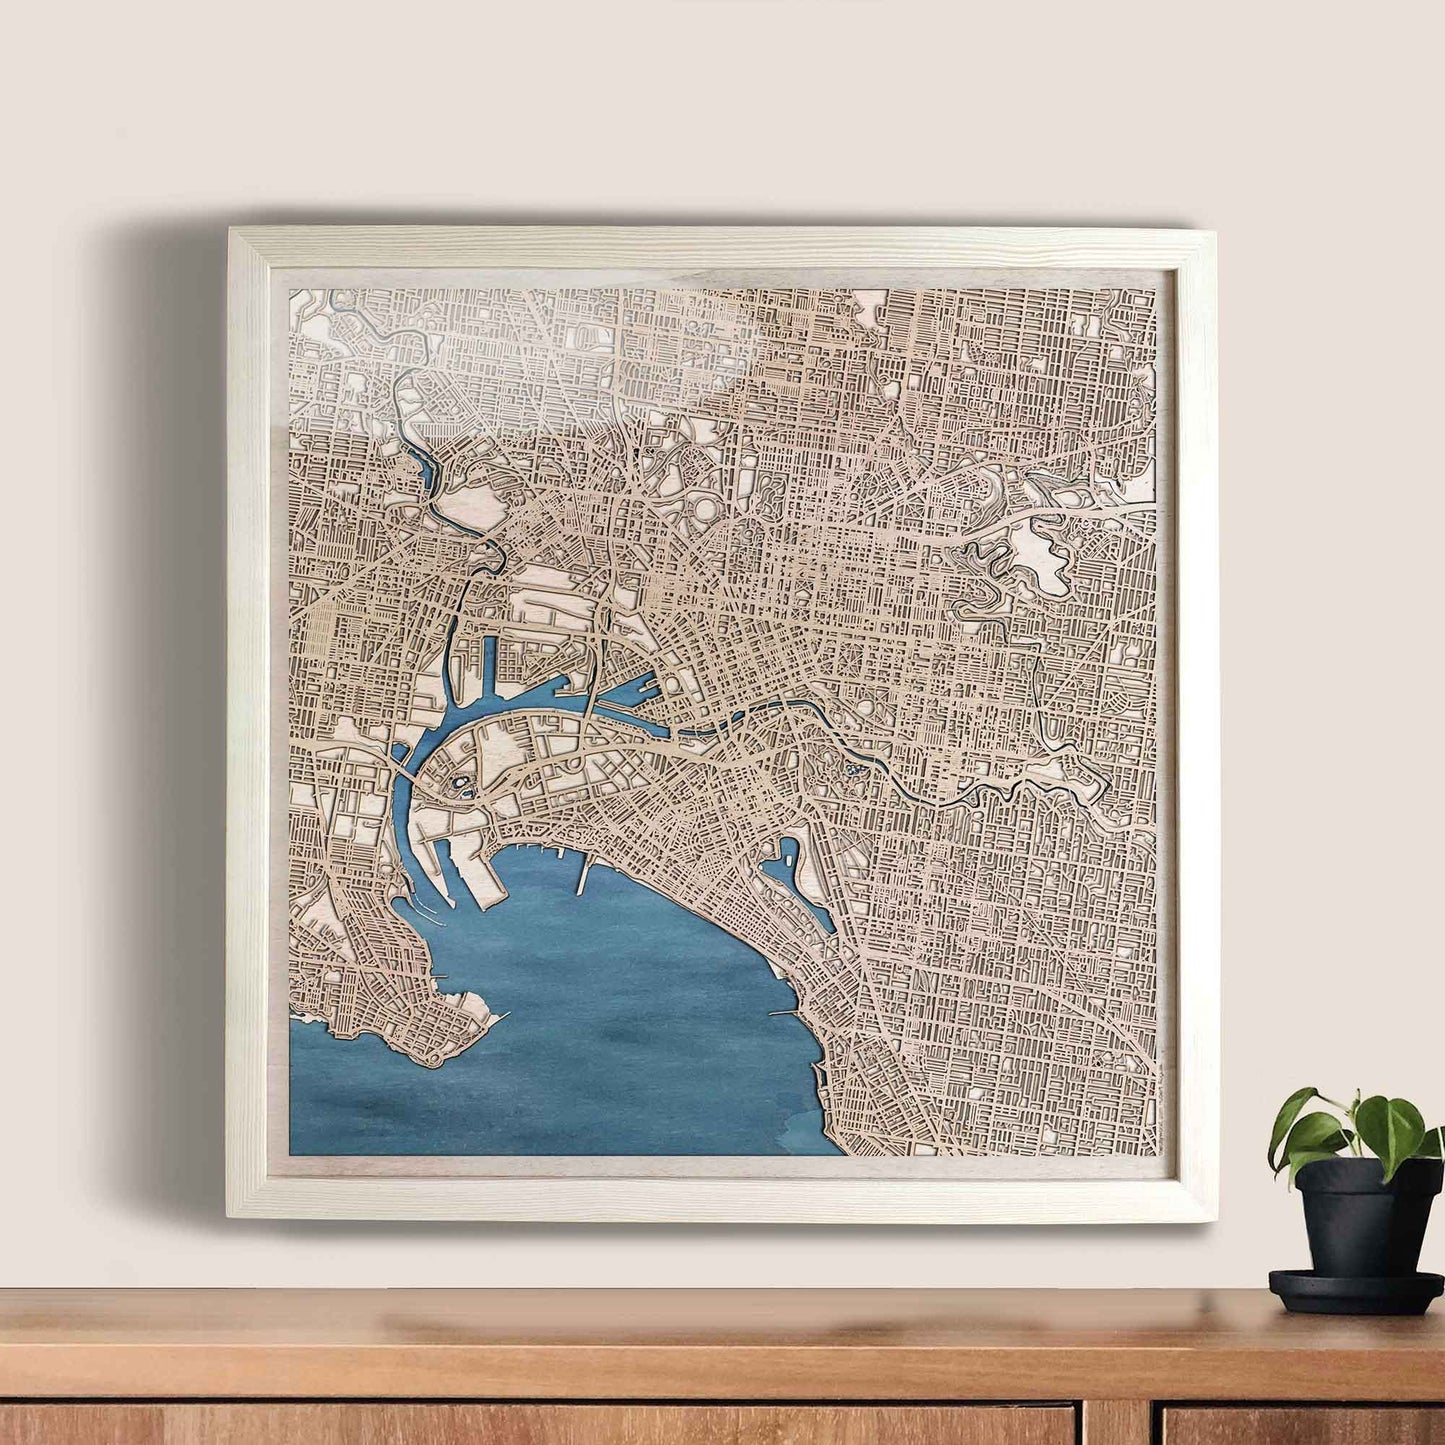 Melbourne Wooden Map by CityWood - Custom Wood Map Art - Unique Laser Cut Engraved - Anniversary Gift